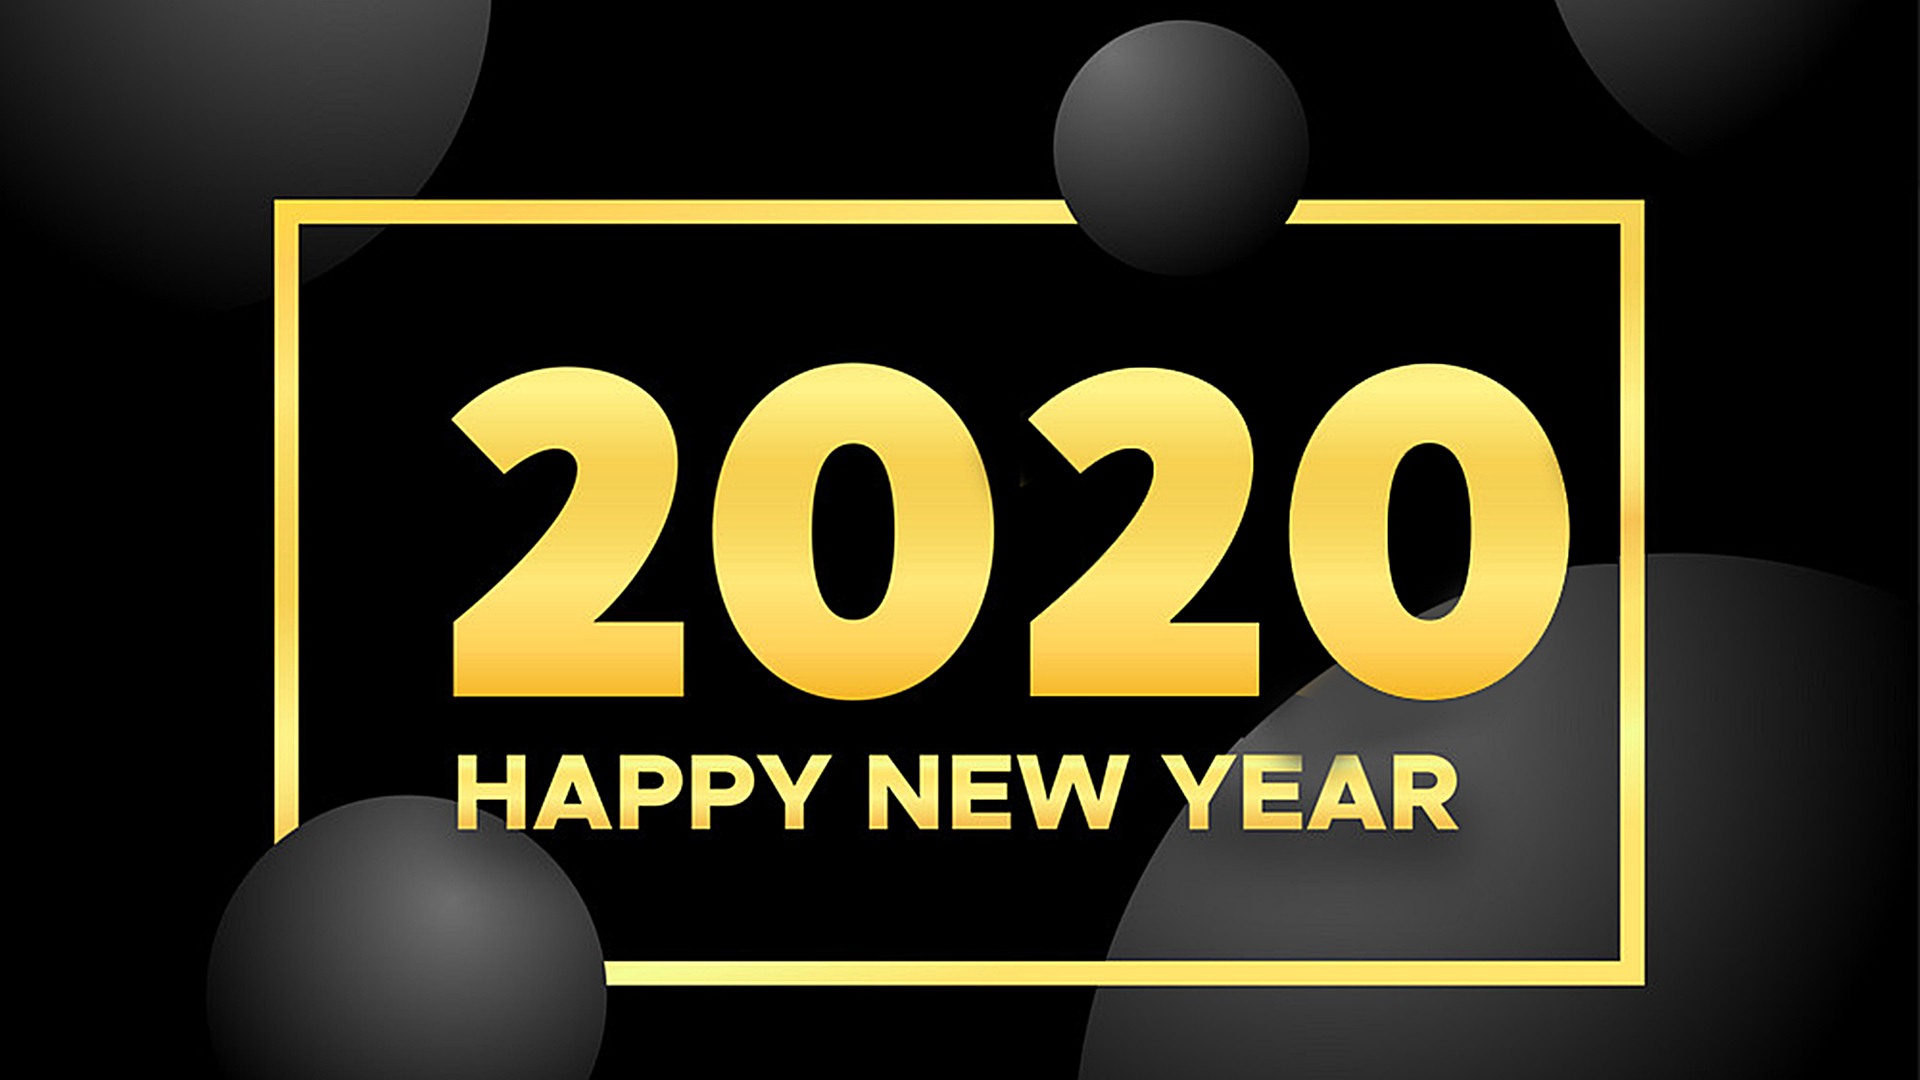 free-download-happy-new-year-2020-background-hd-wallpapers-45540